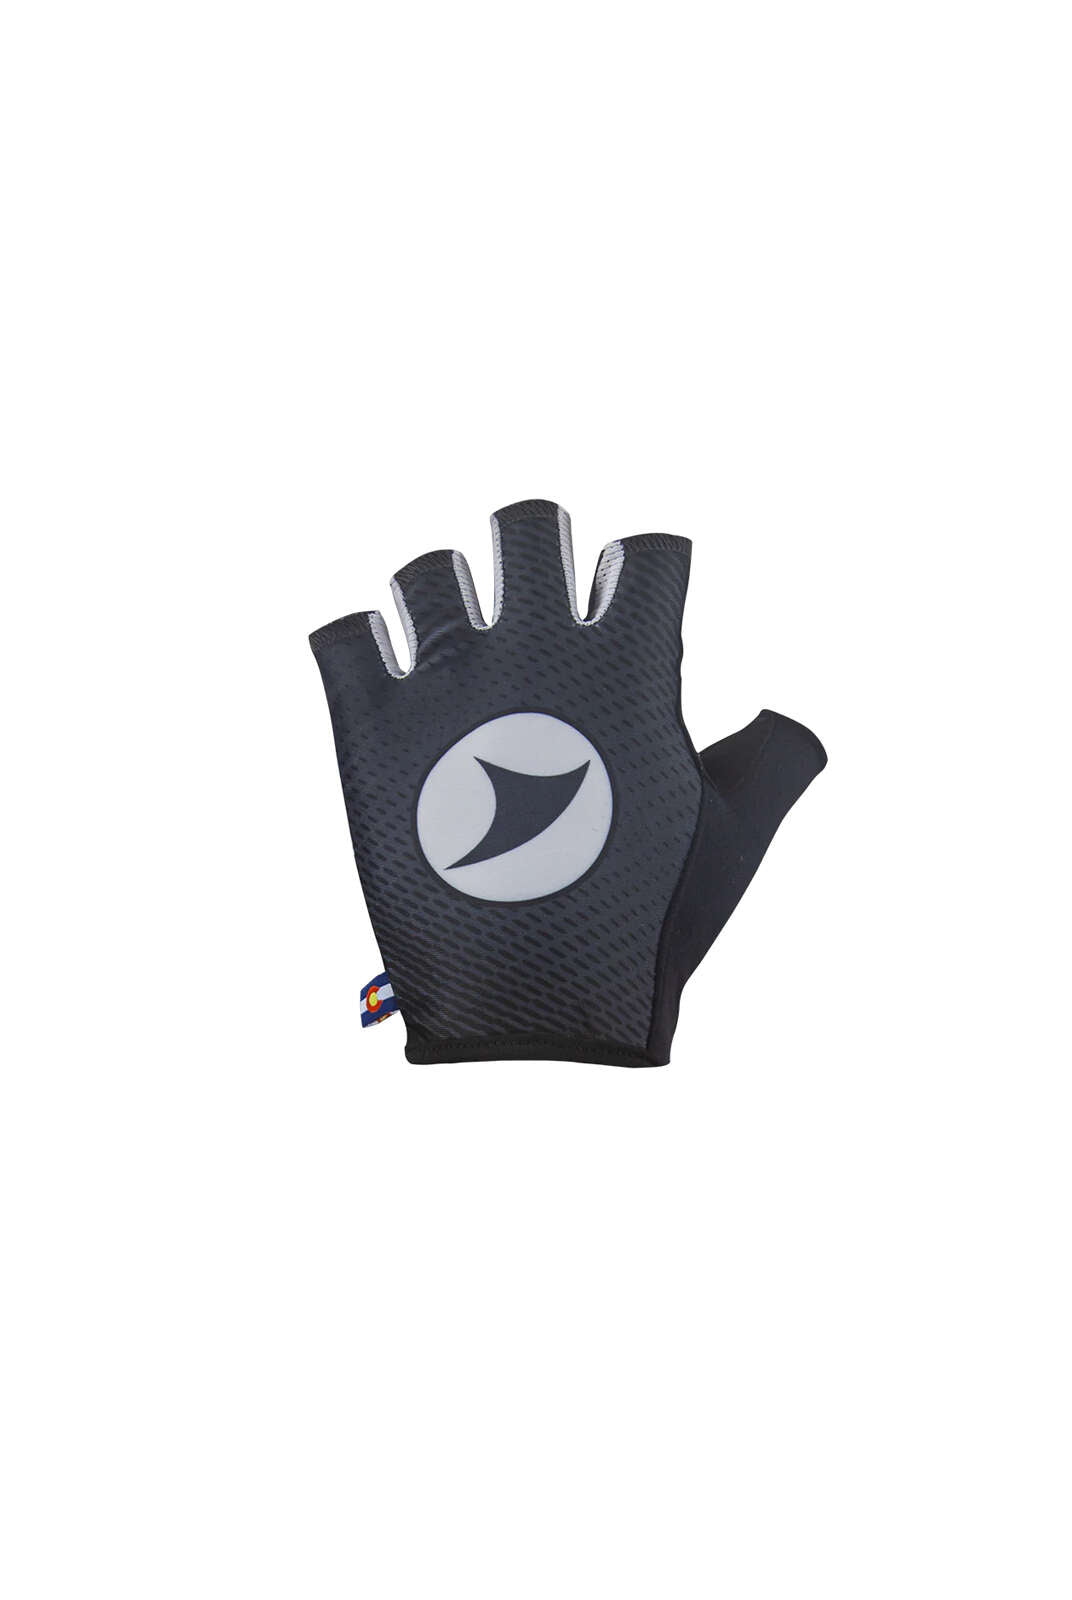 Custom Cycling Gloves - Ascent Unisex